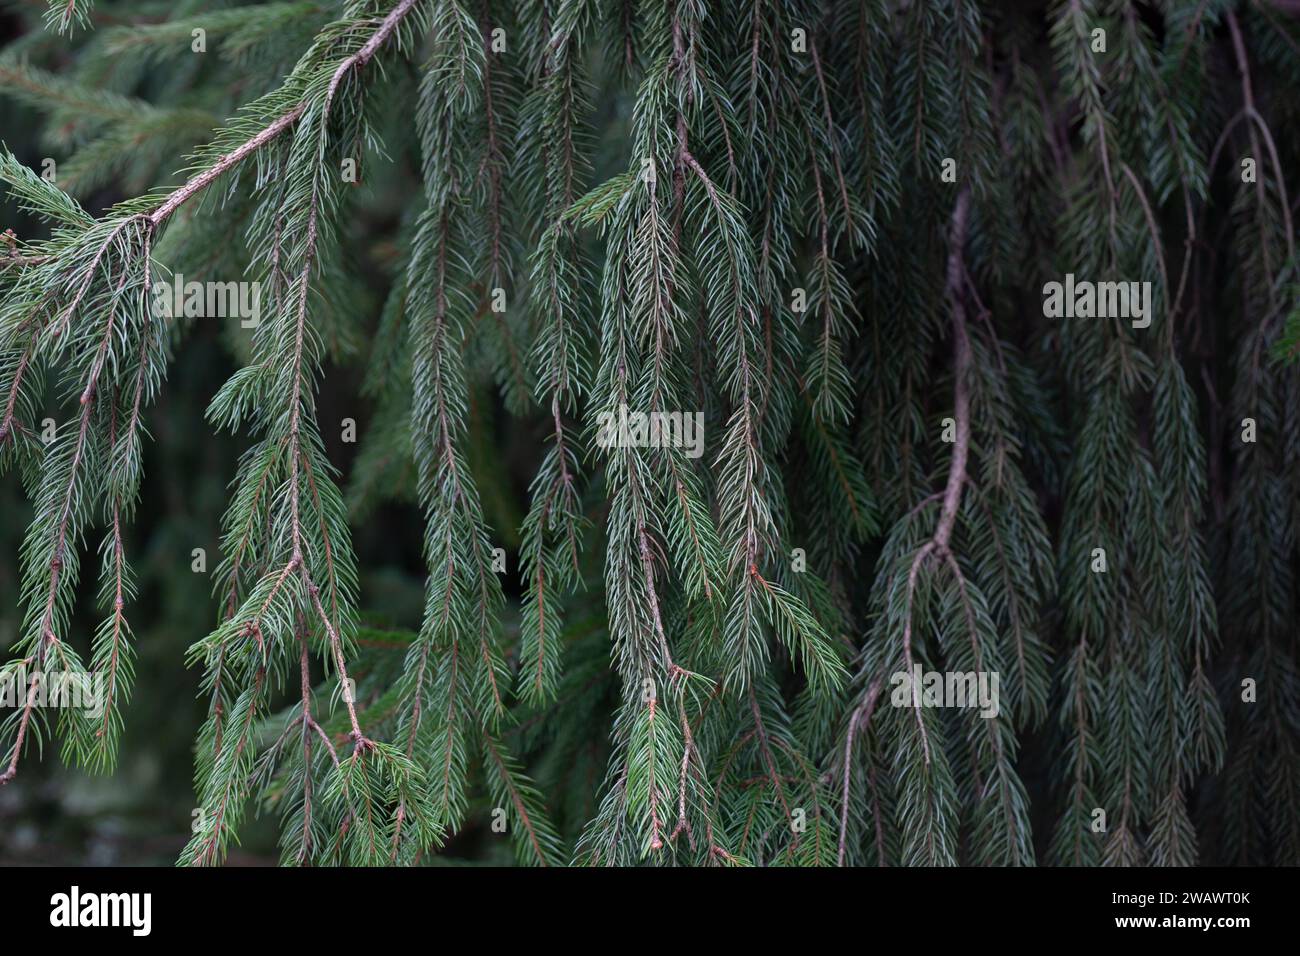 Branch of European spruce or Picea abies. Cultivar Virgata or Snake branch spruce. Natural green background of coniferous branches. Stock Photo